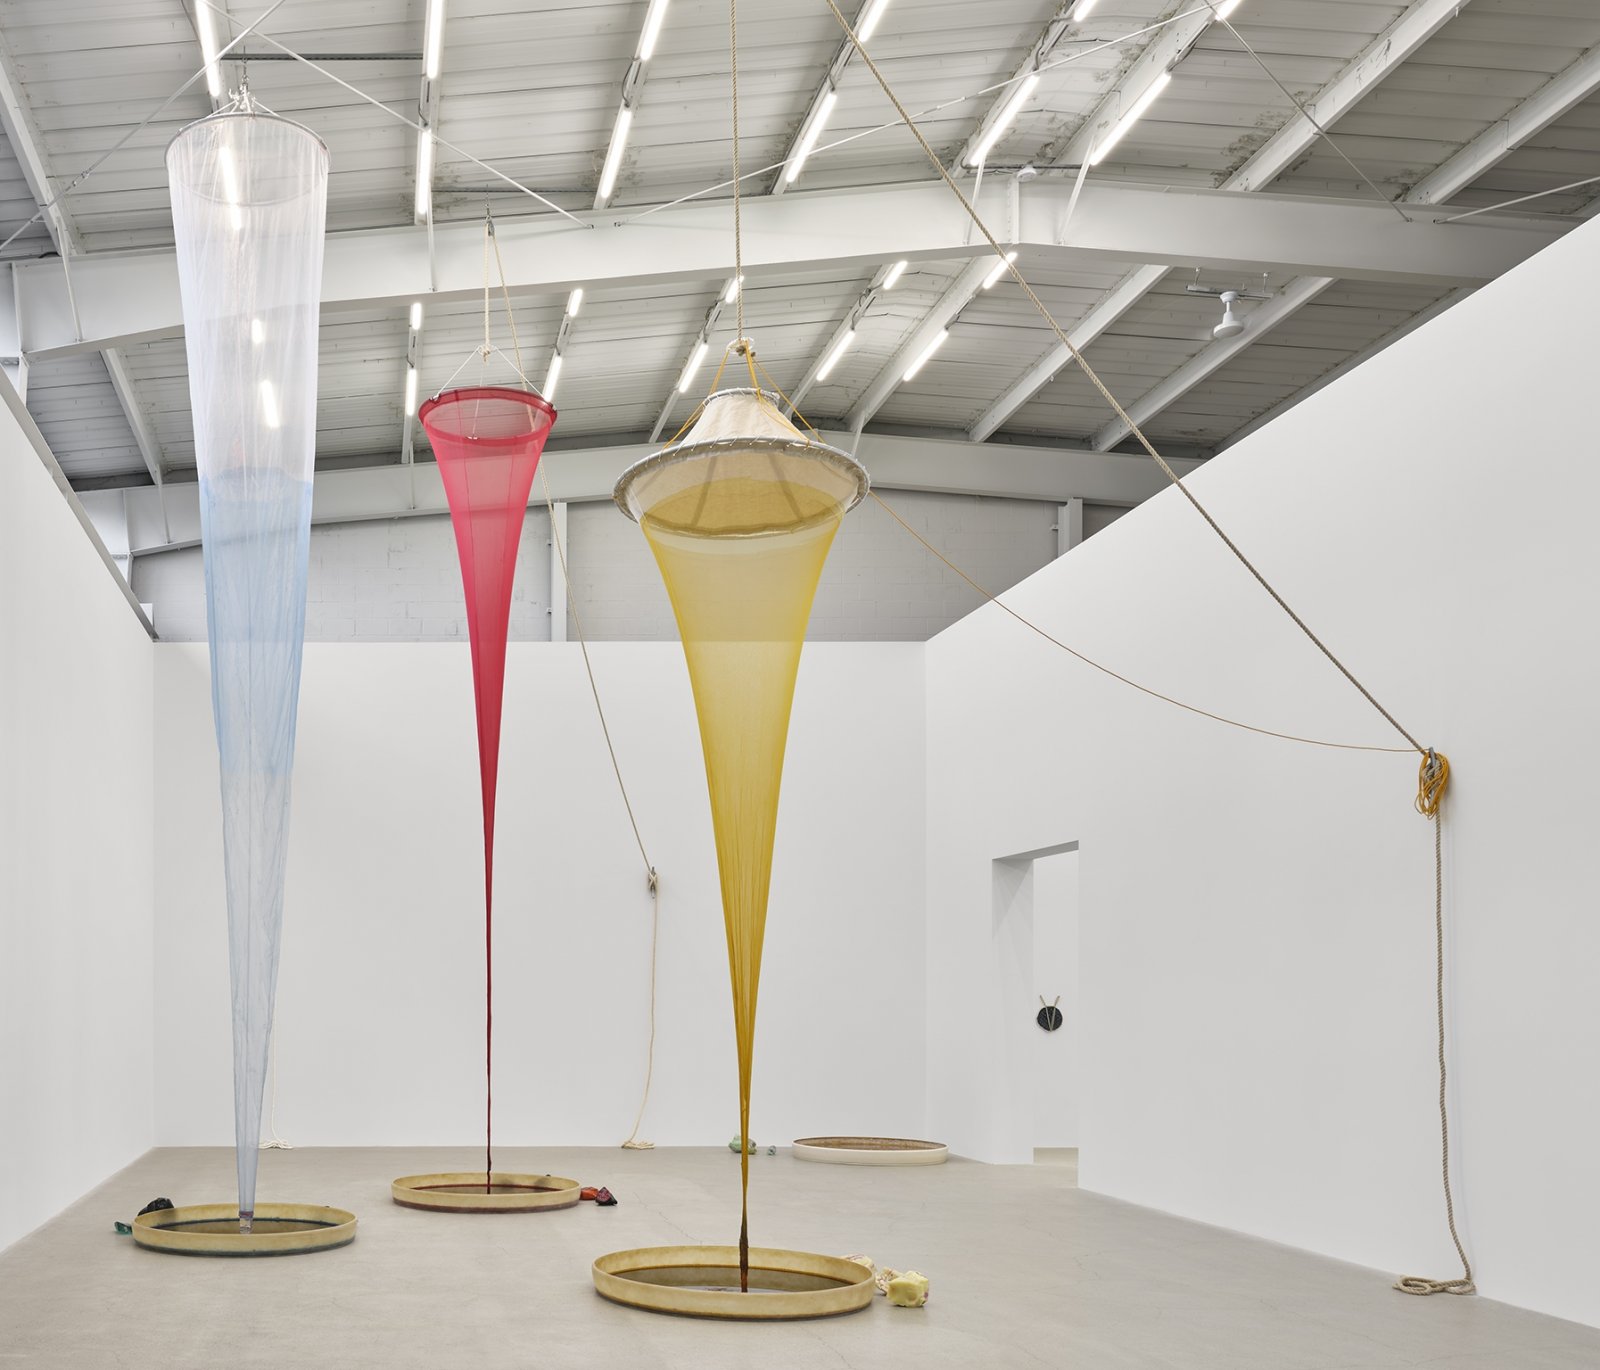 Christina Mackie, Colour Drop, 2014, silk, linen, polyester, aluminum, acrylic, manila, sisal, galvanized steel, fibreglass, gel-coated fibreglass, non-toxic water-based dye, water, worked glass, installation dimensions variable by Christina Mackie